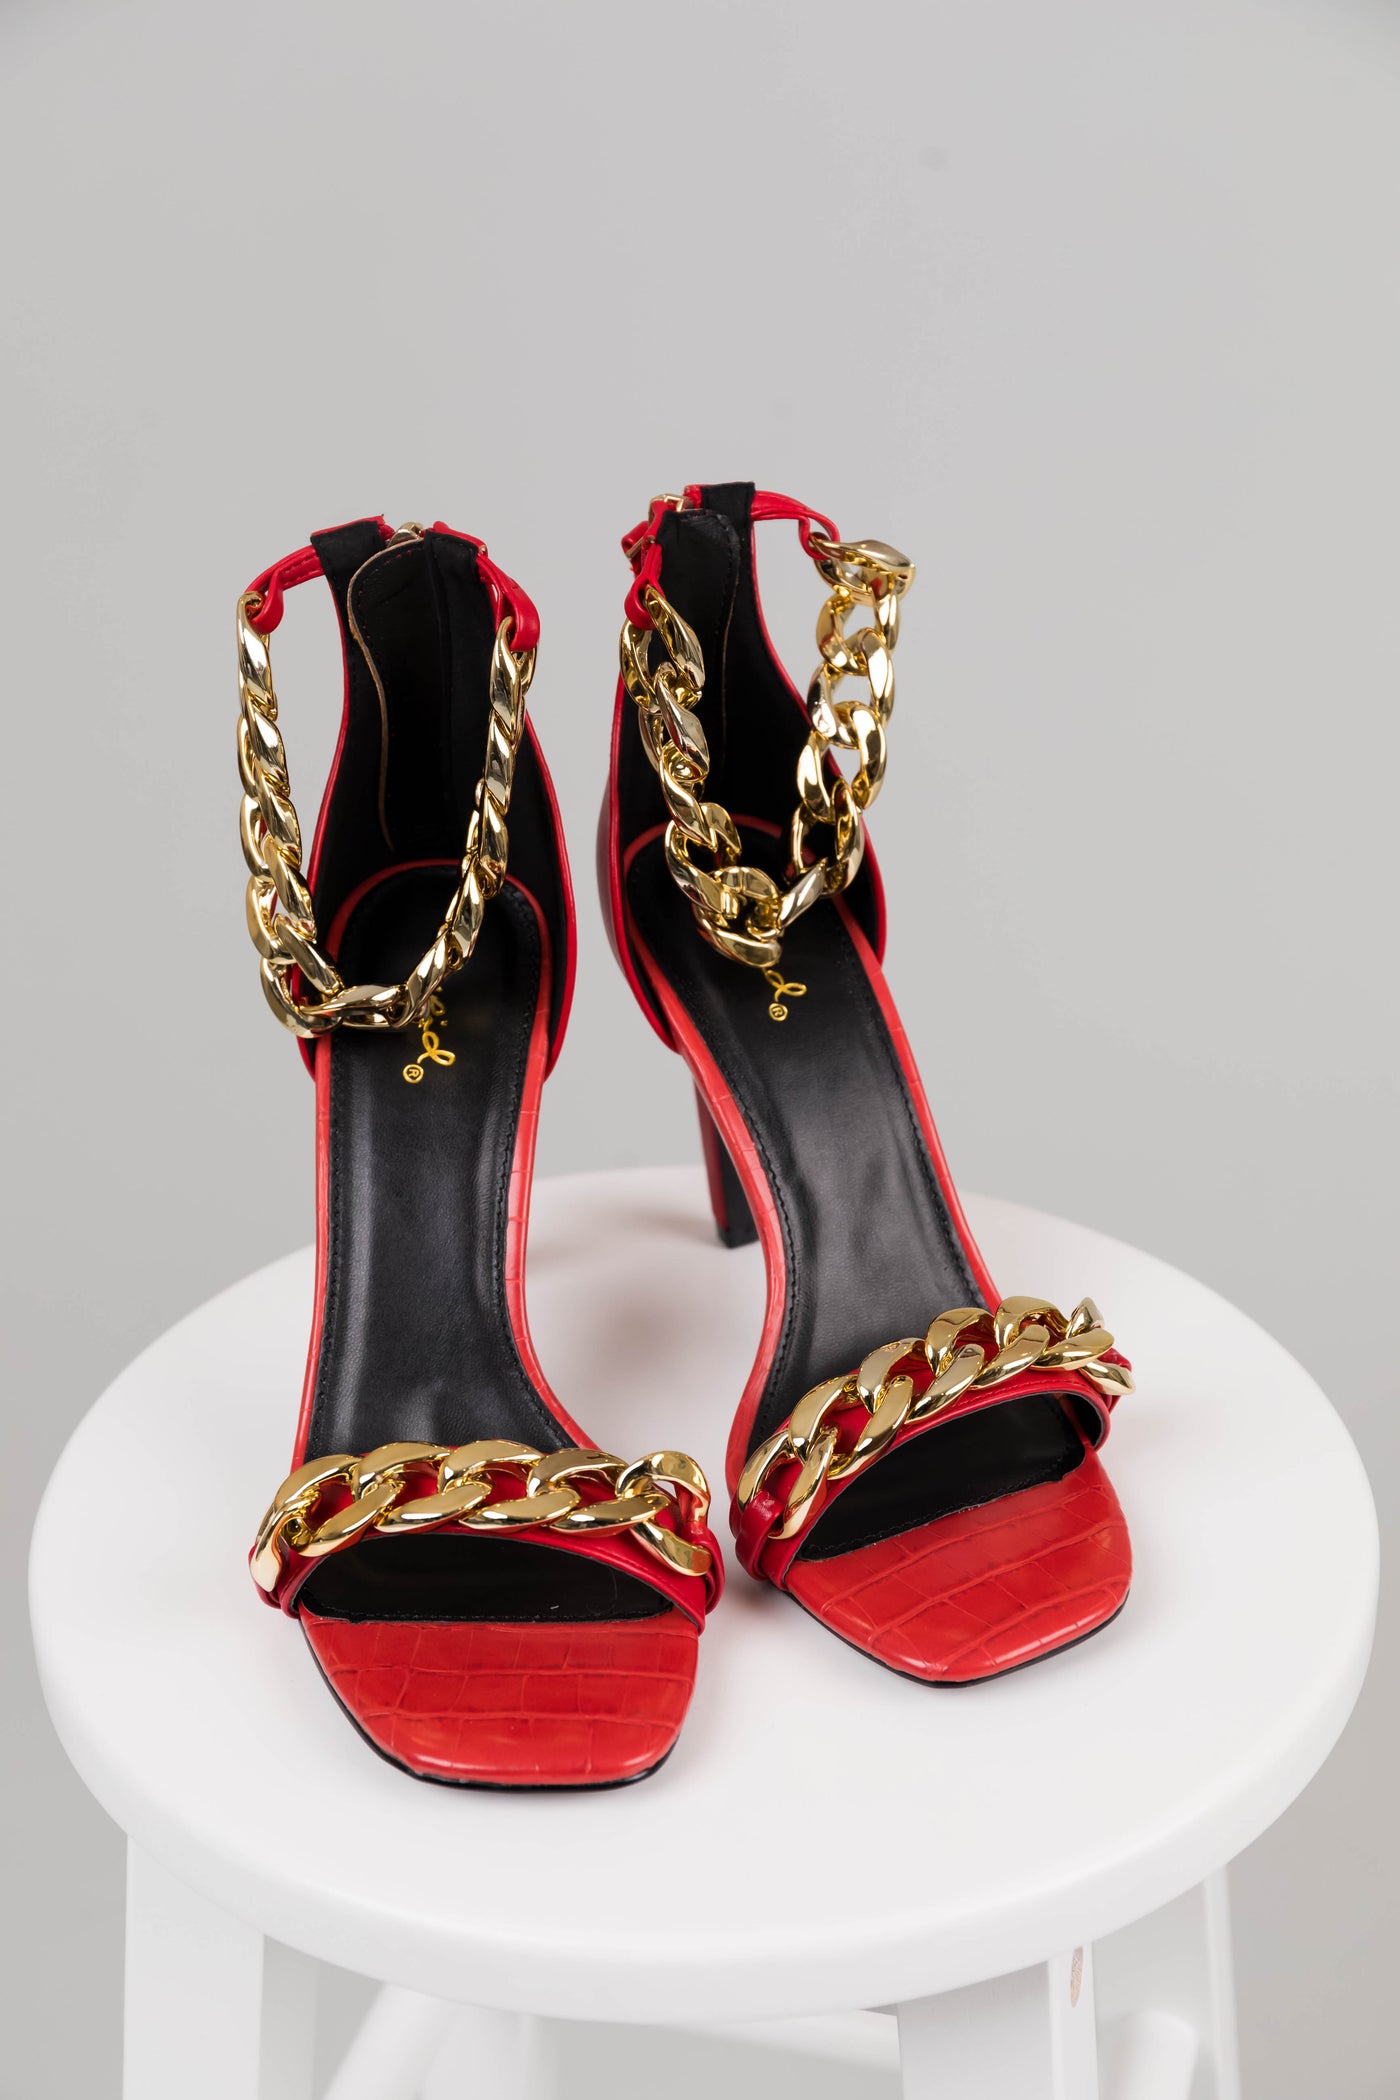 Ruby Square Toe Chain Strap High Heels